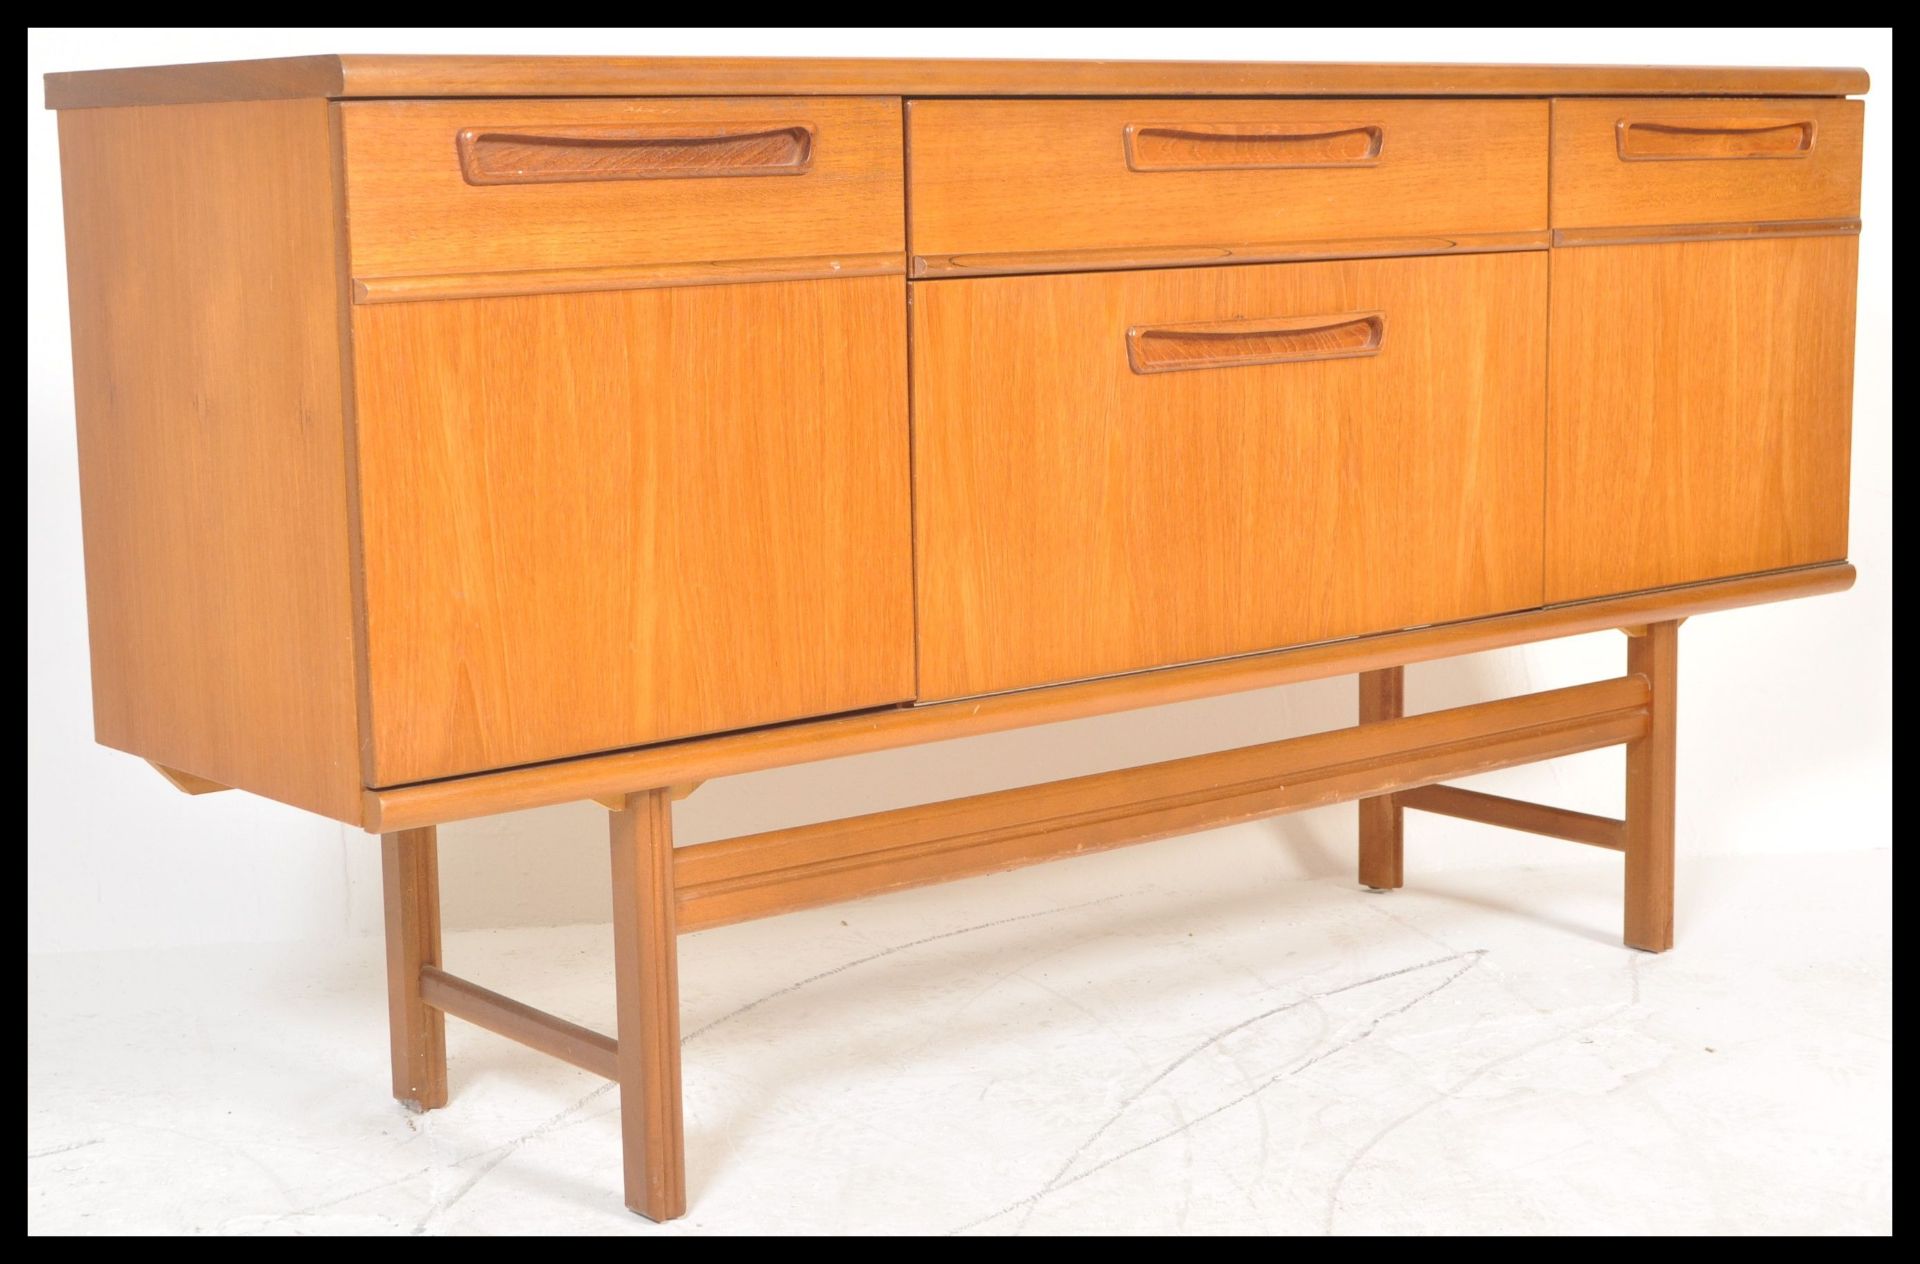 A retro 20th Century teak wood sideboard / credenza by Nathan,having a configuration of drawers